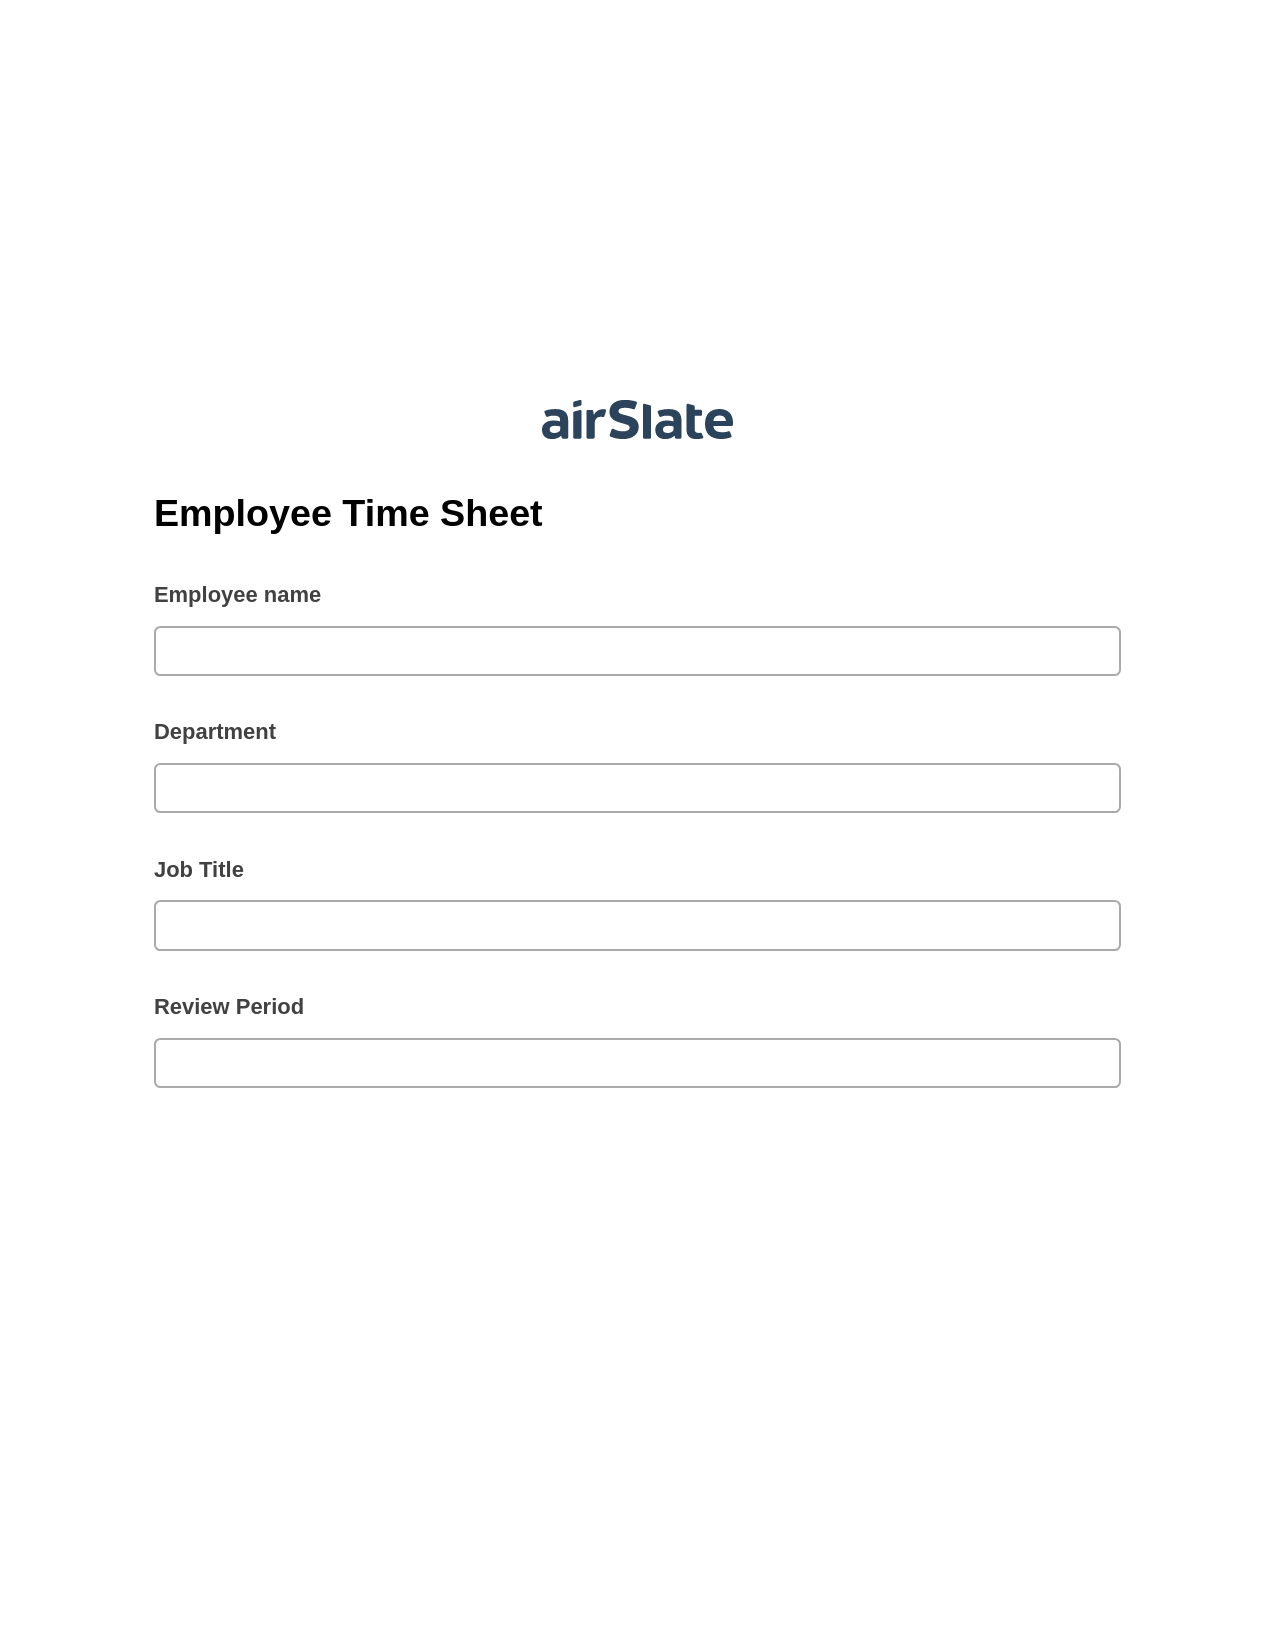 Employee Time Sheet Pre-fill from CSV File Bot, Rename Slate Bot, Archive to SharePoint Folder Bot